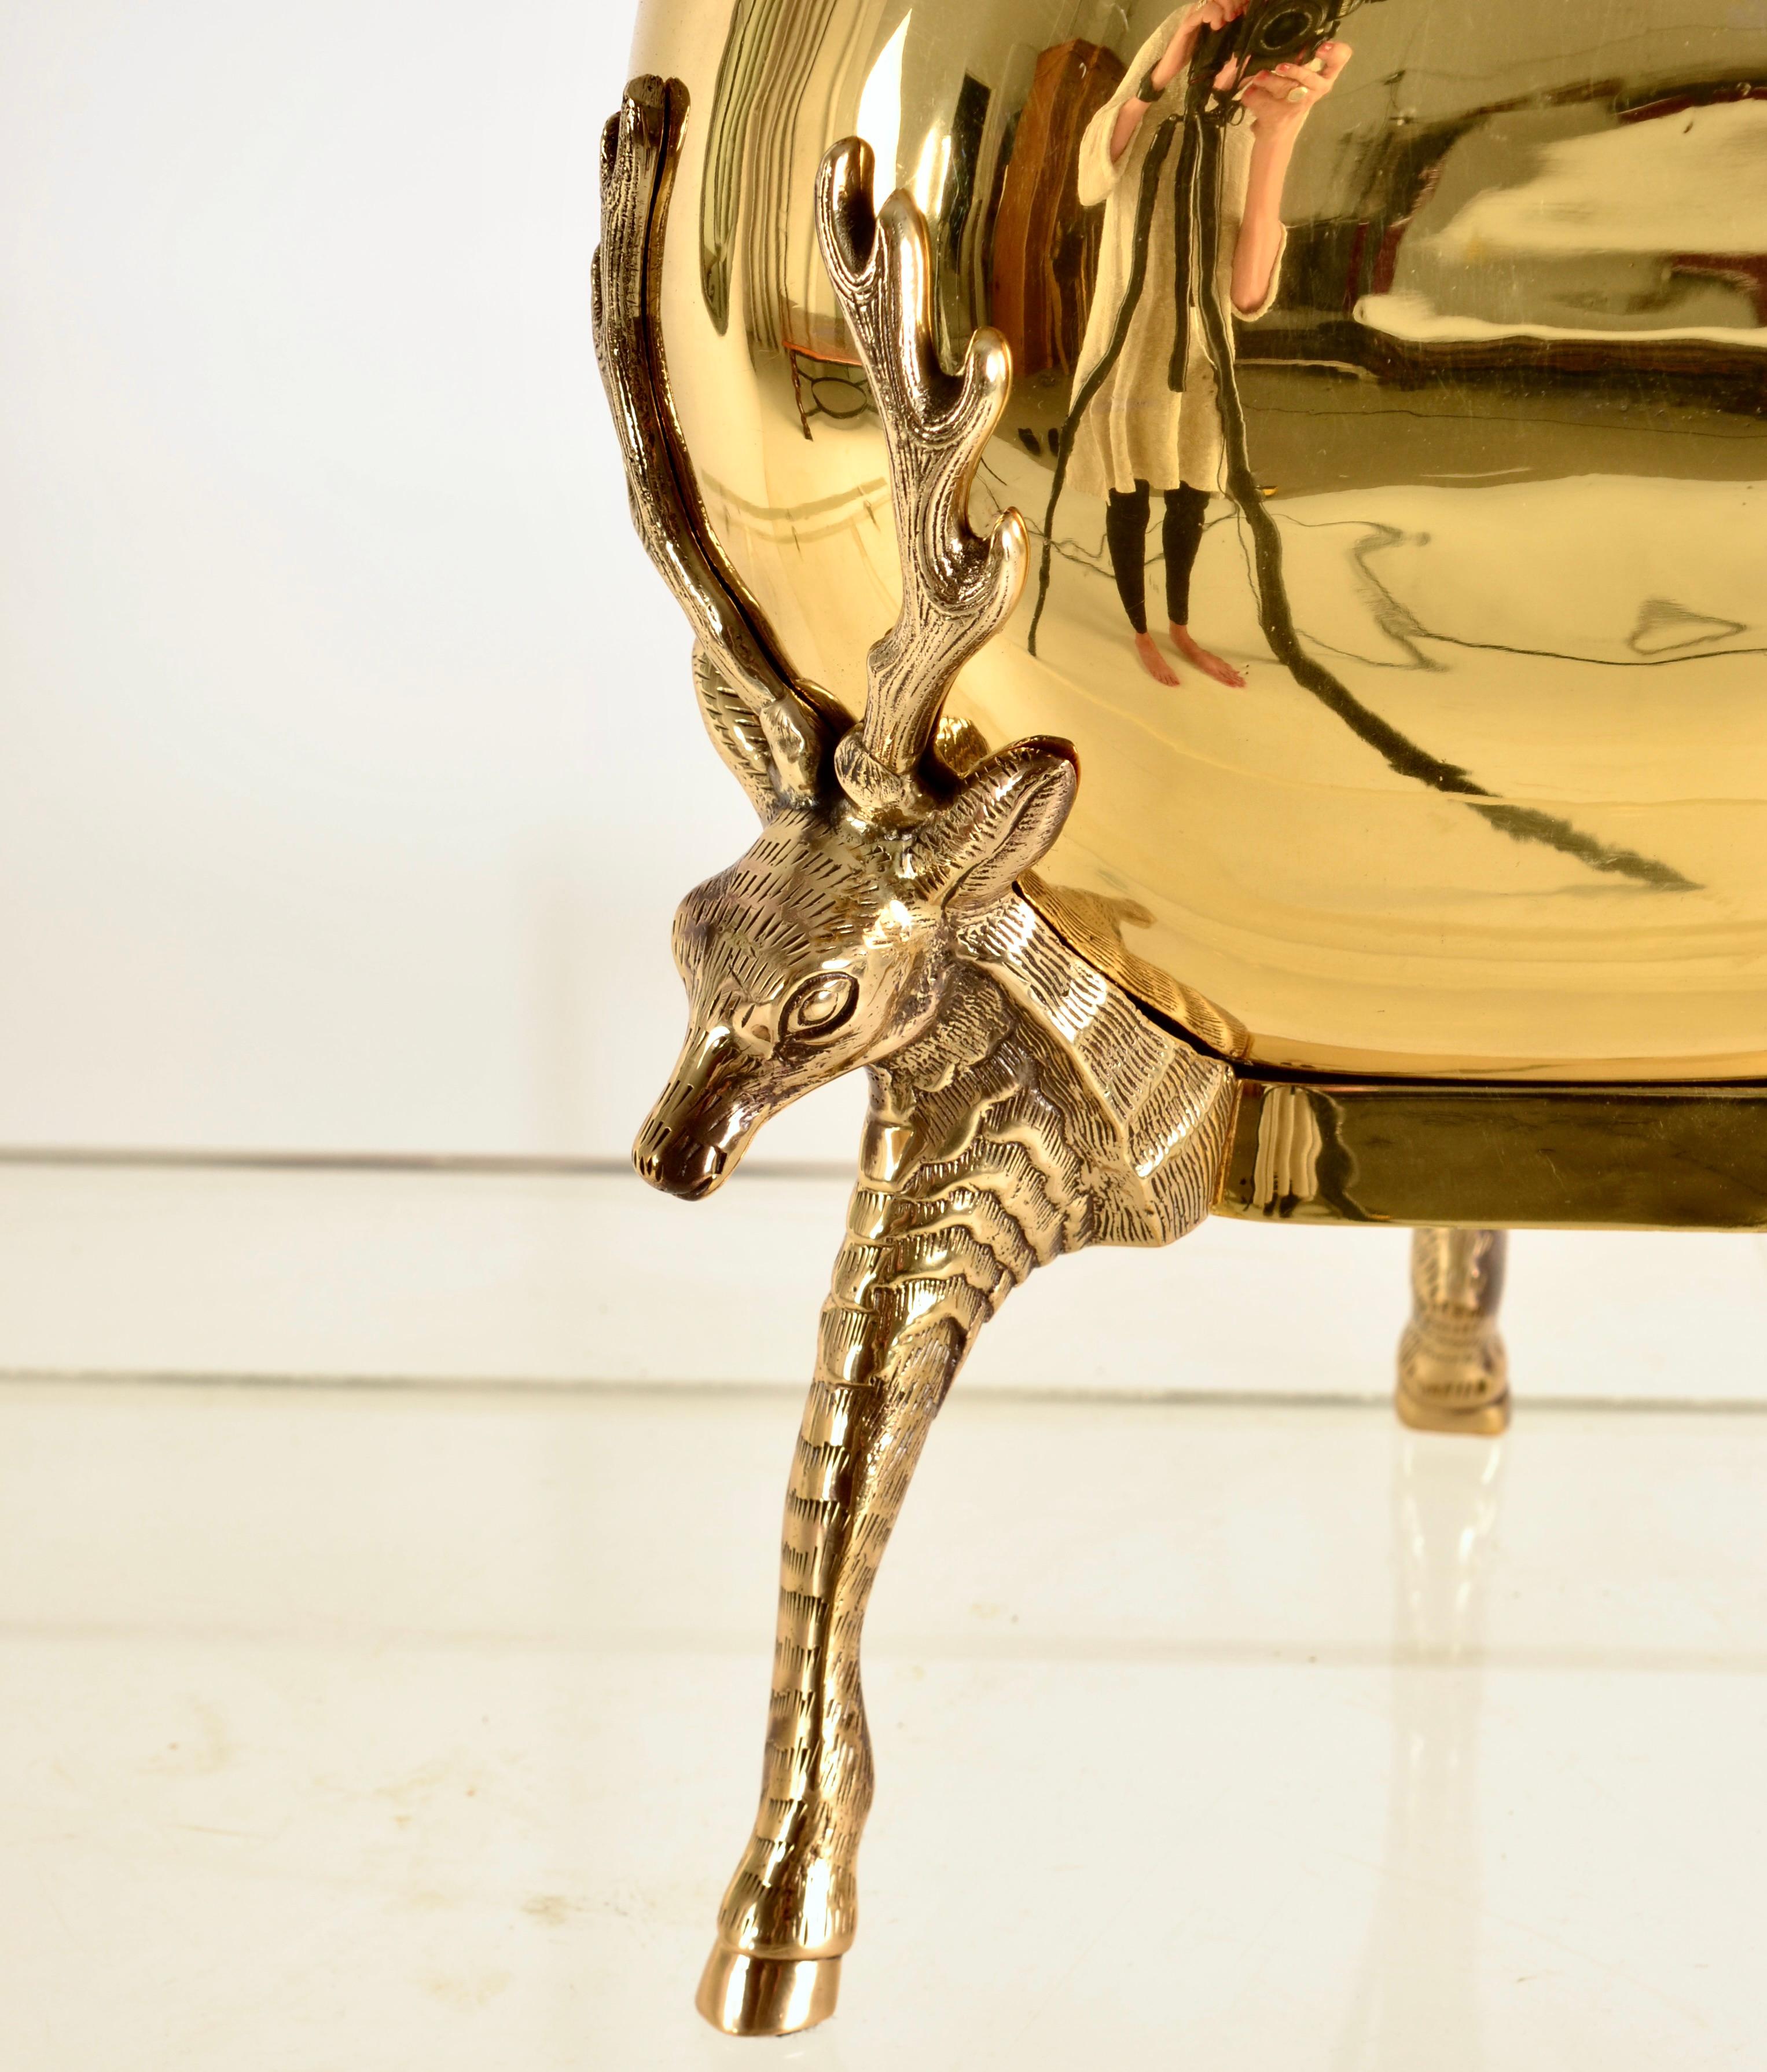 American Classical Chapman Brass Table Lamp with Figured Stag Legs For Sale